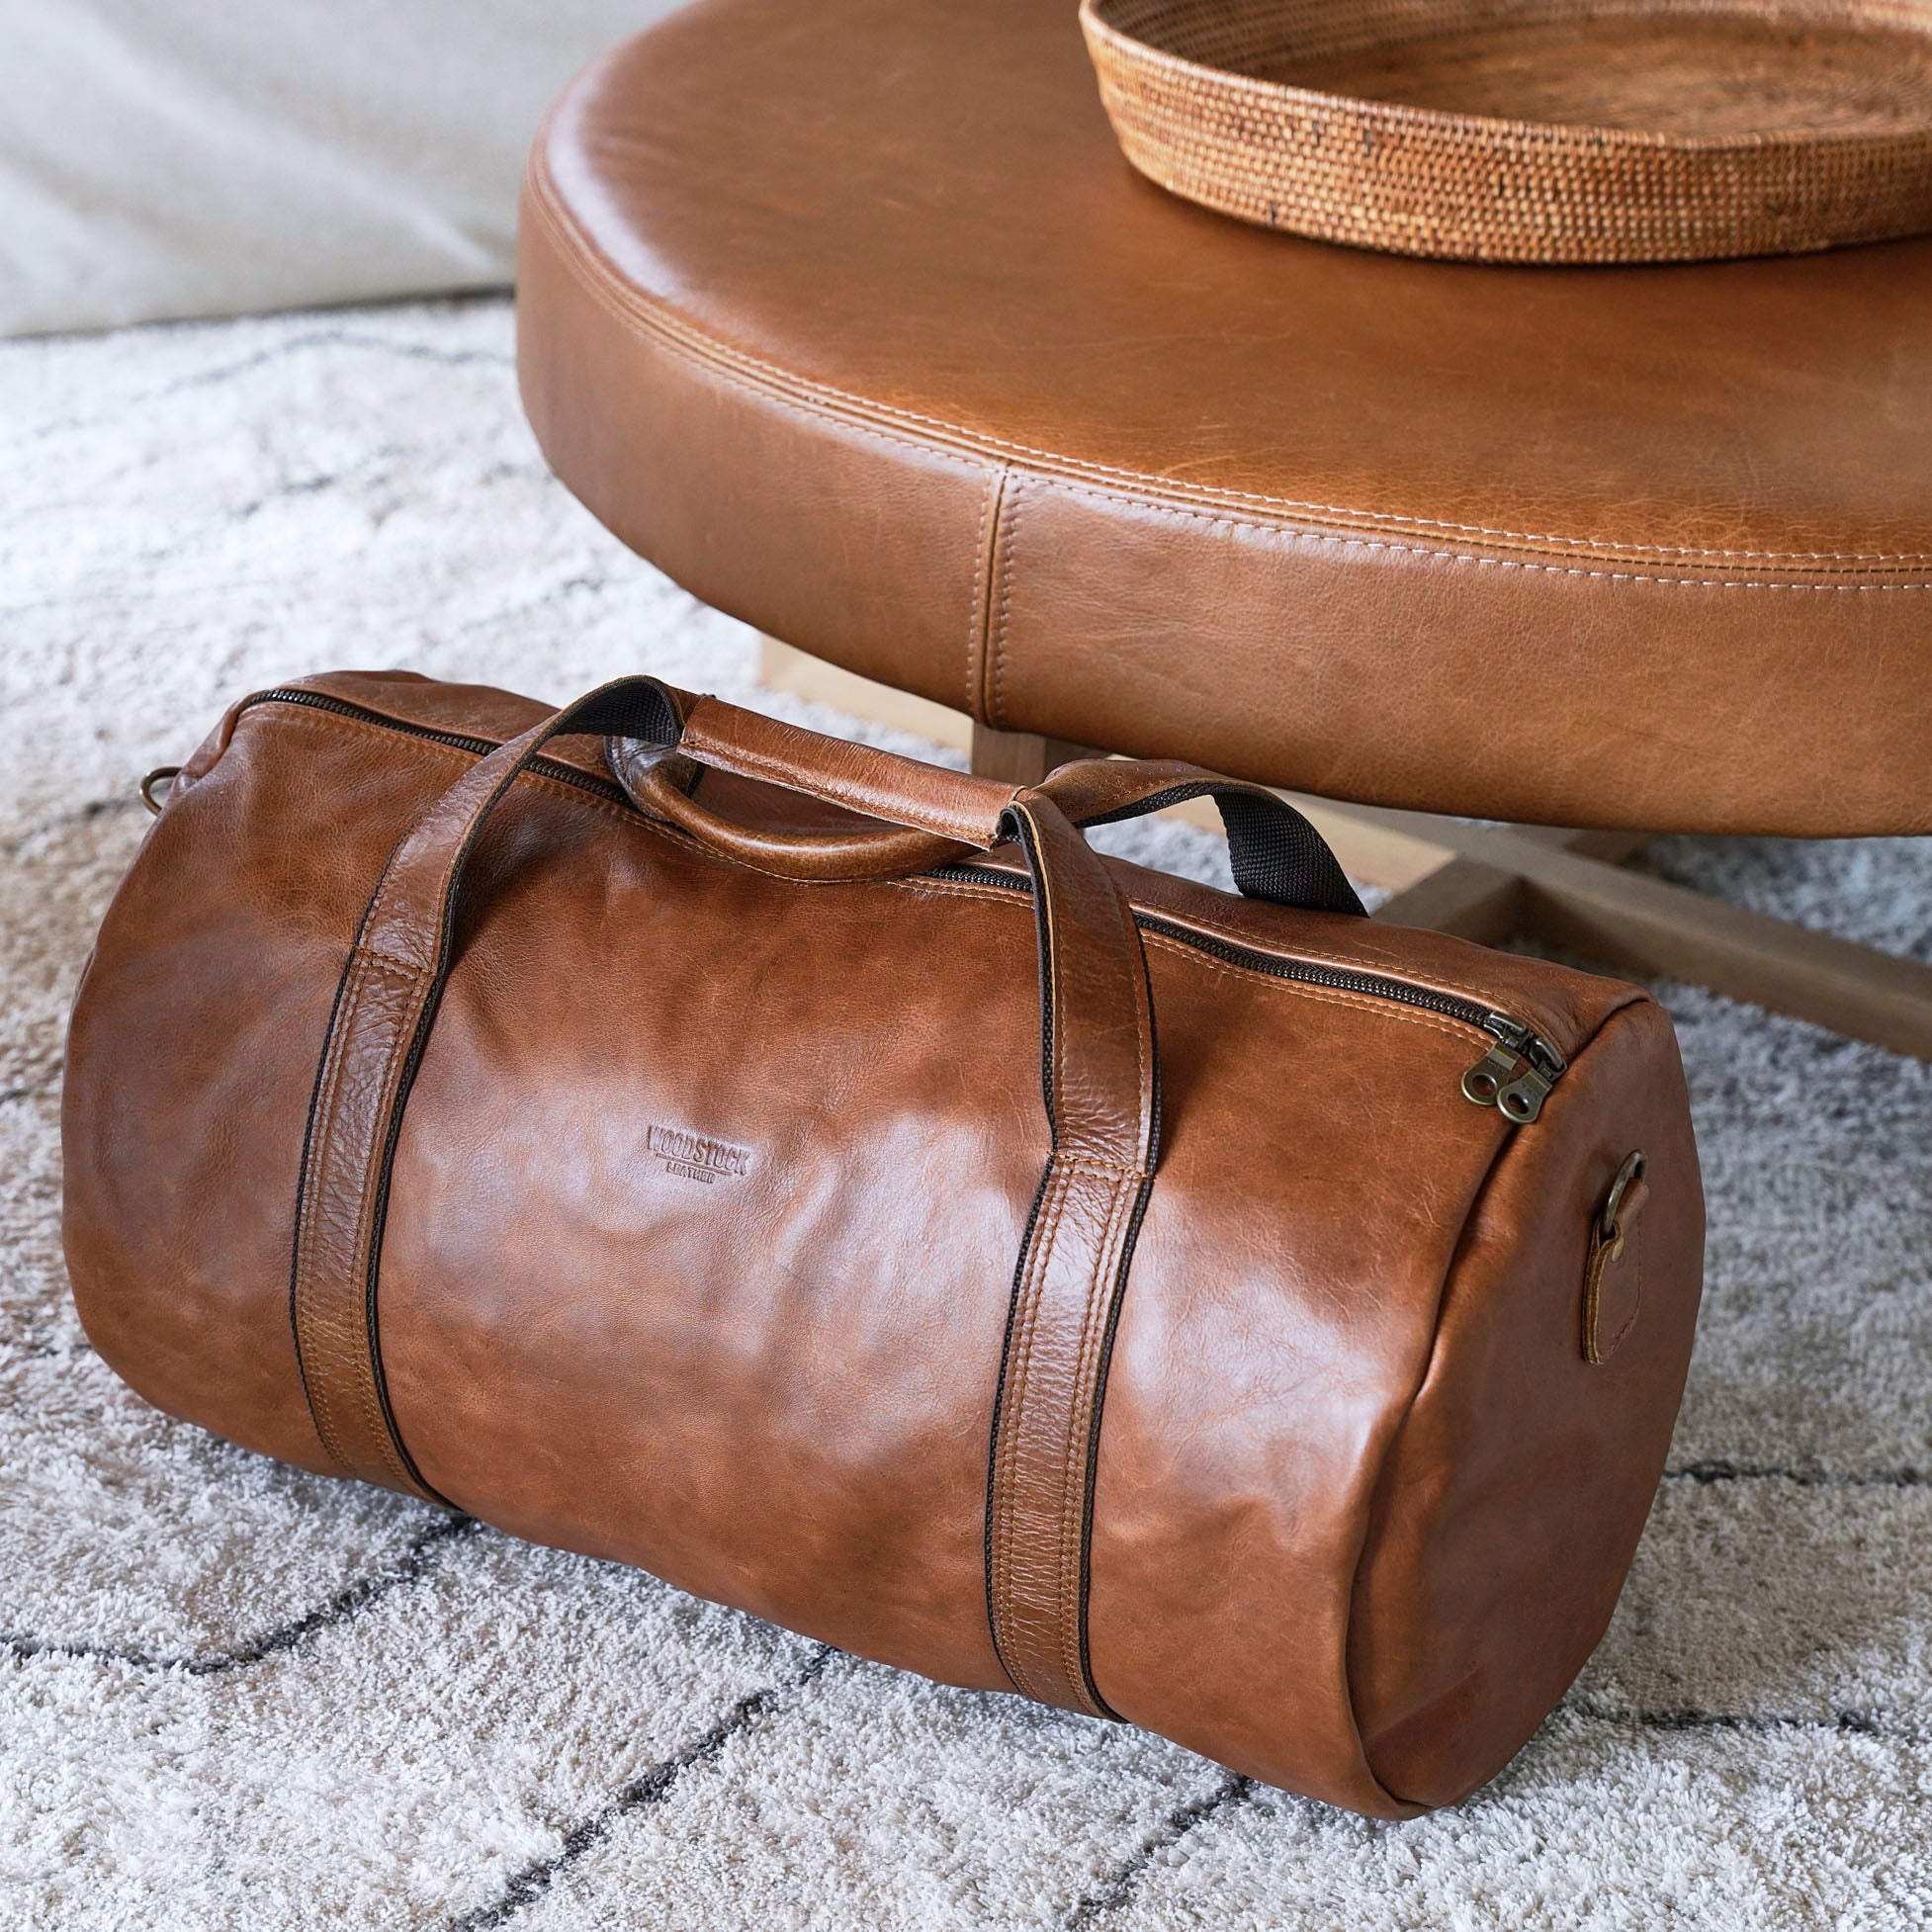 Caring for your Woodstock Leather bag